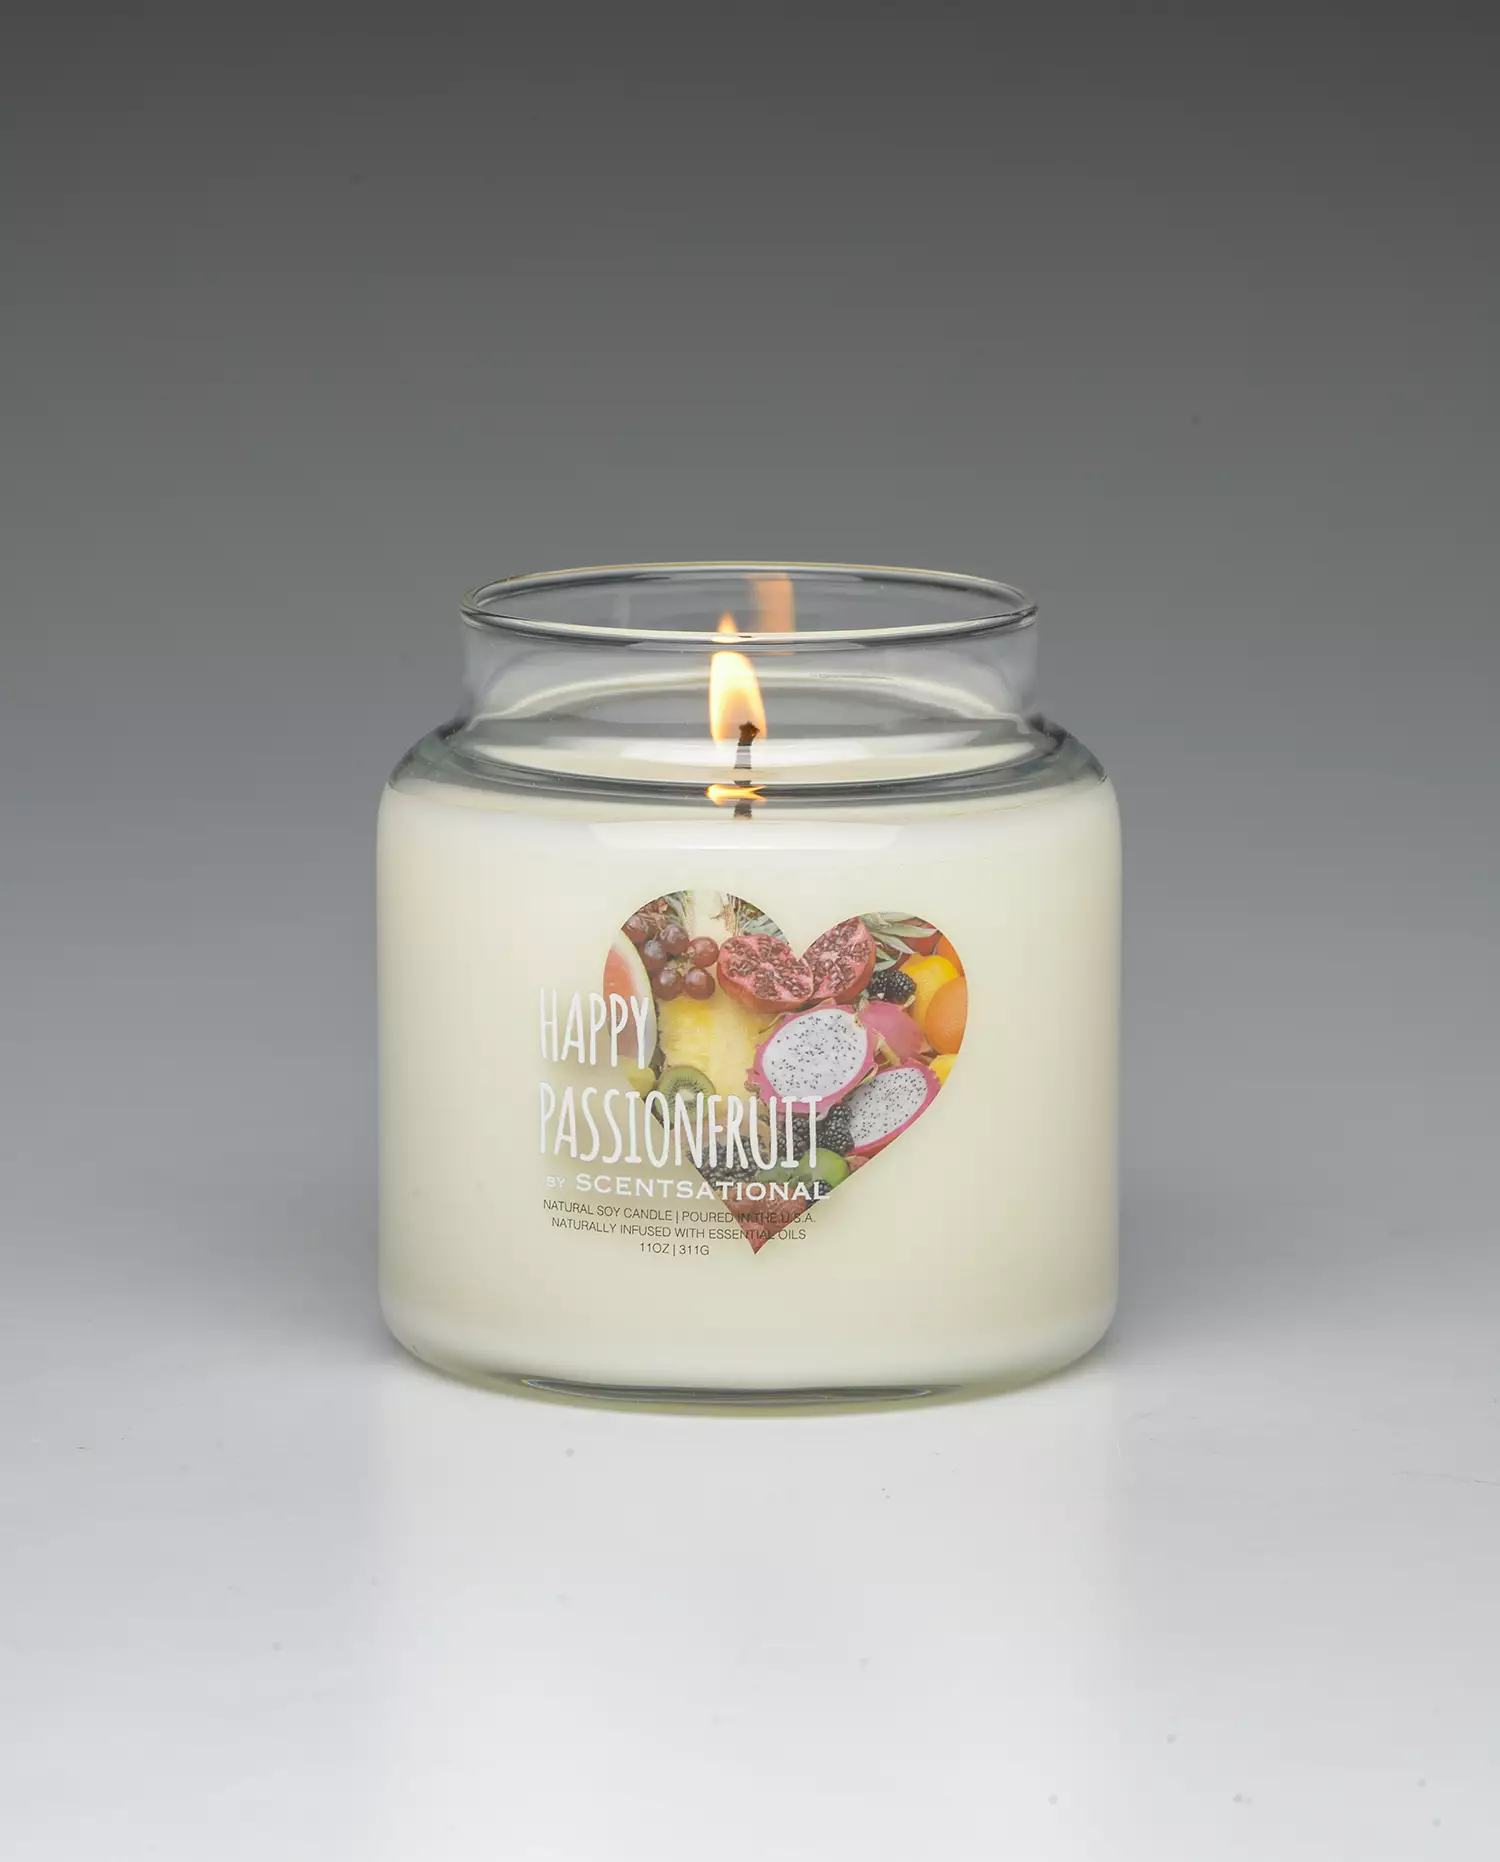 Happy Passionfruit 19oz scented candle burning